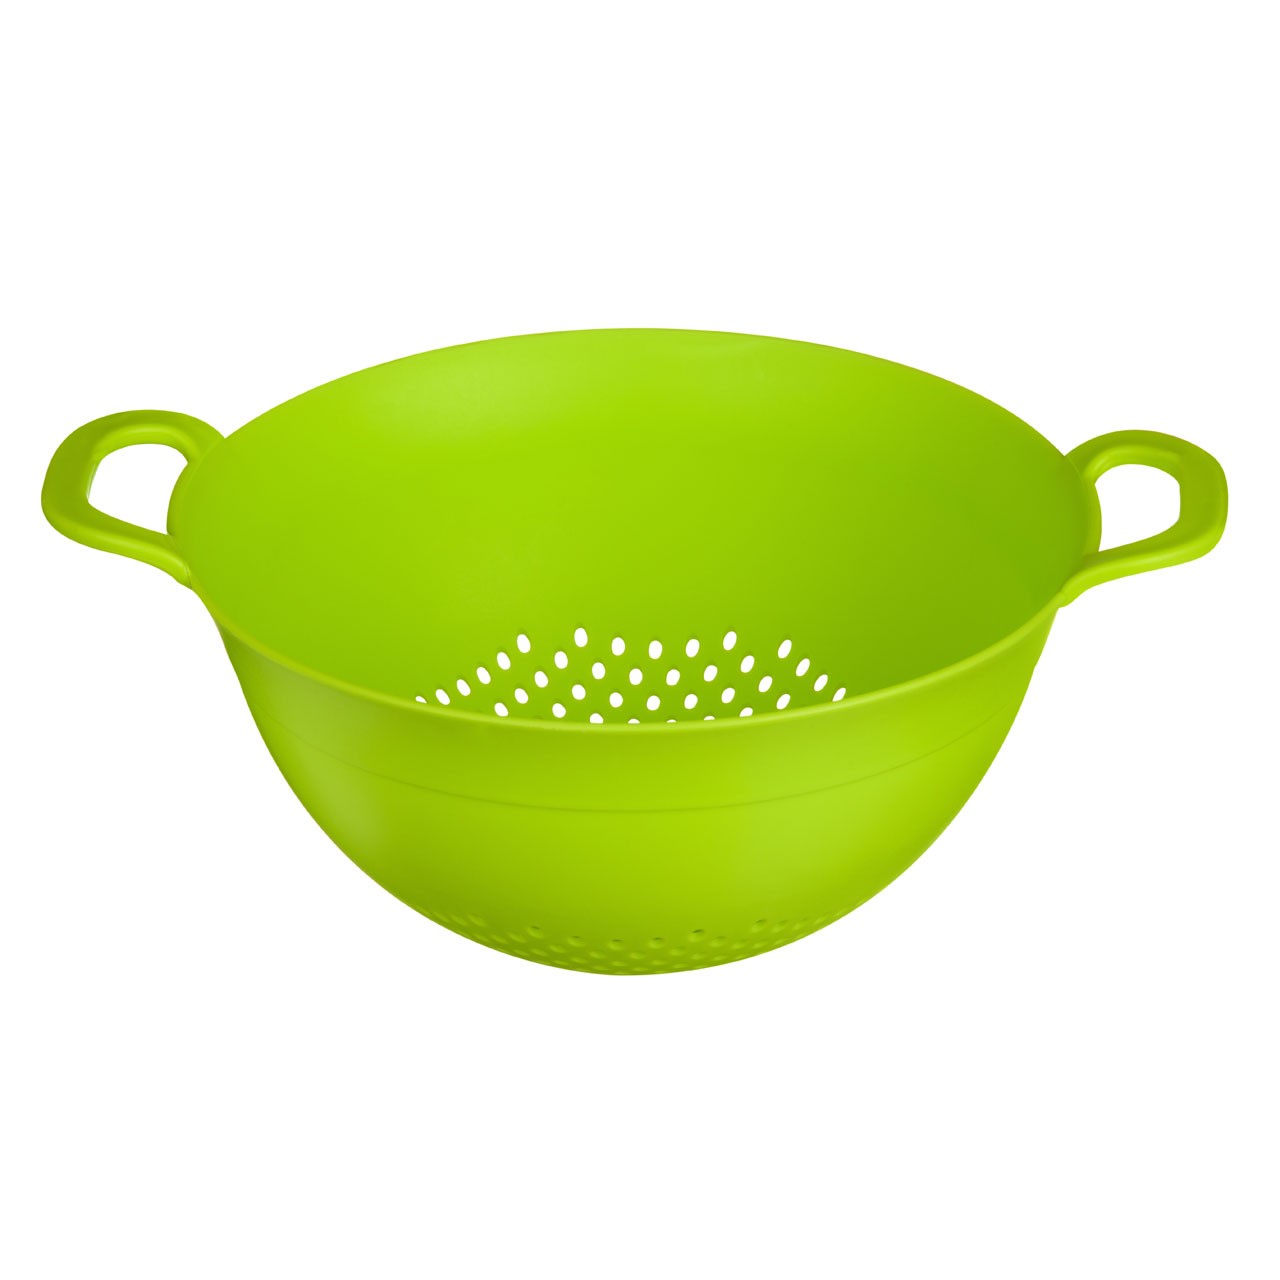 Colander An ideal utensil for all kitchens